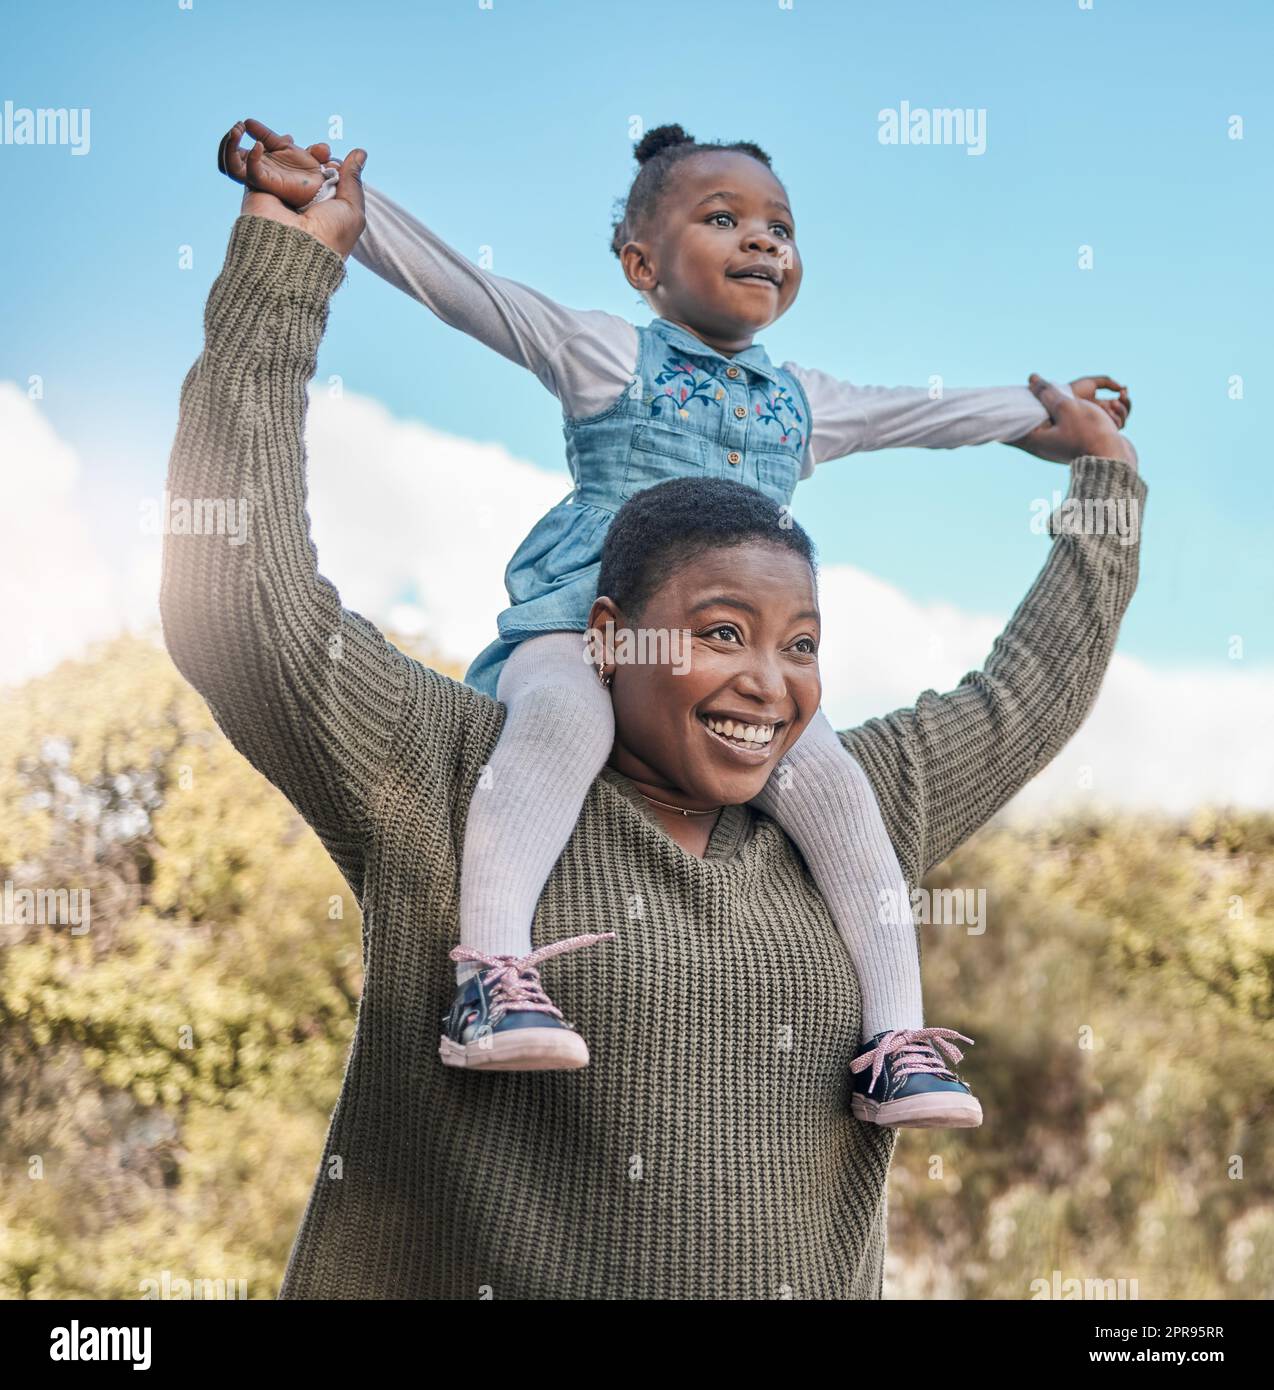 Its all smiles when theyre at the park. a mother carrying her daughter on her shoulders outdoors. Stock Photo